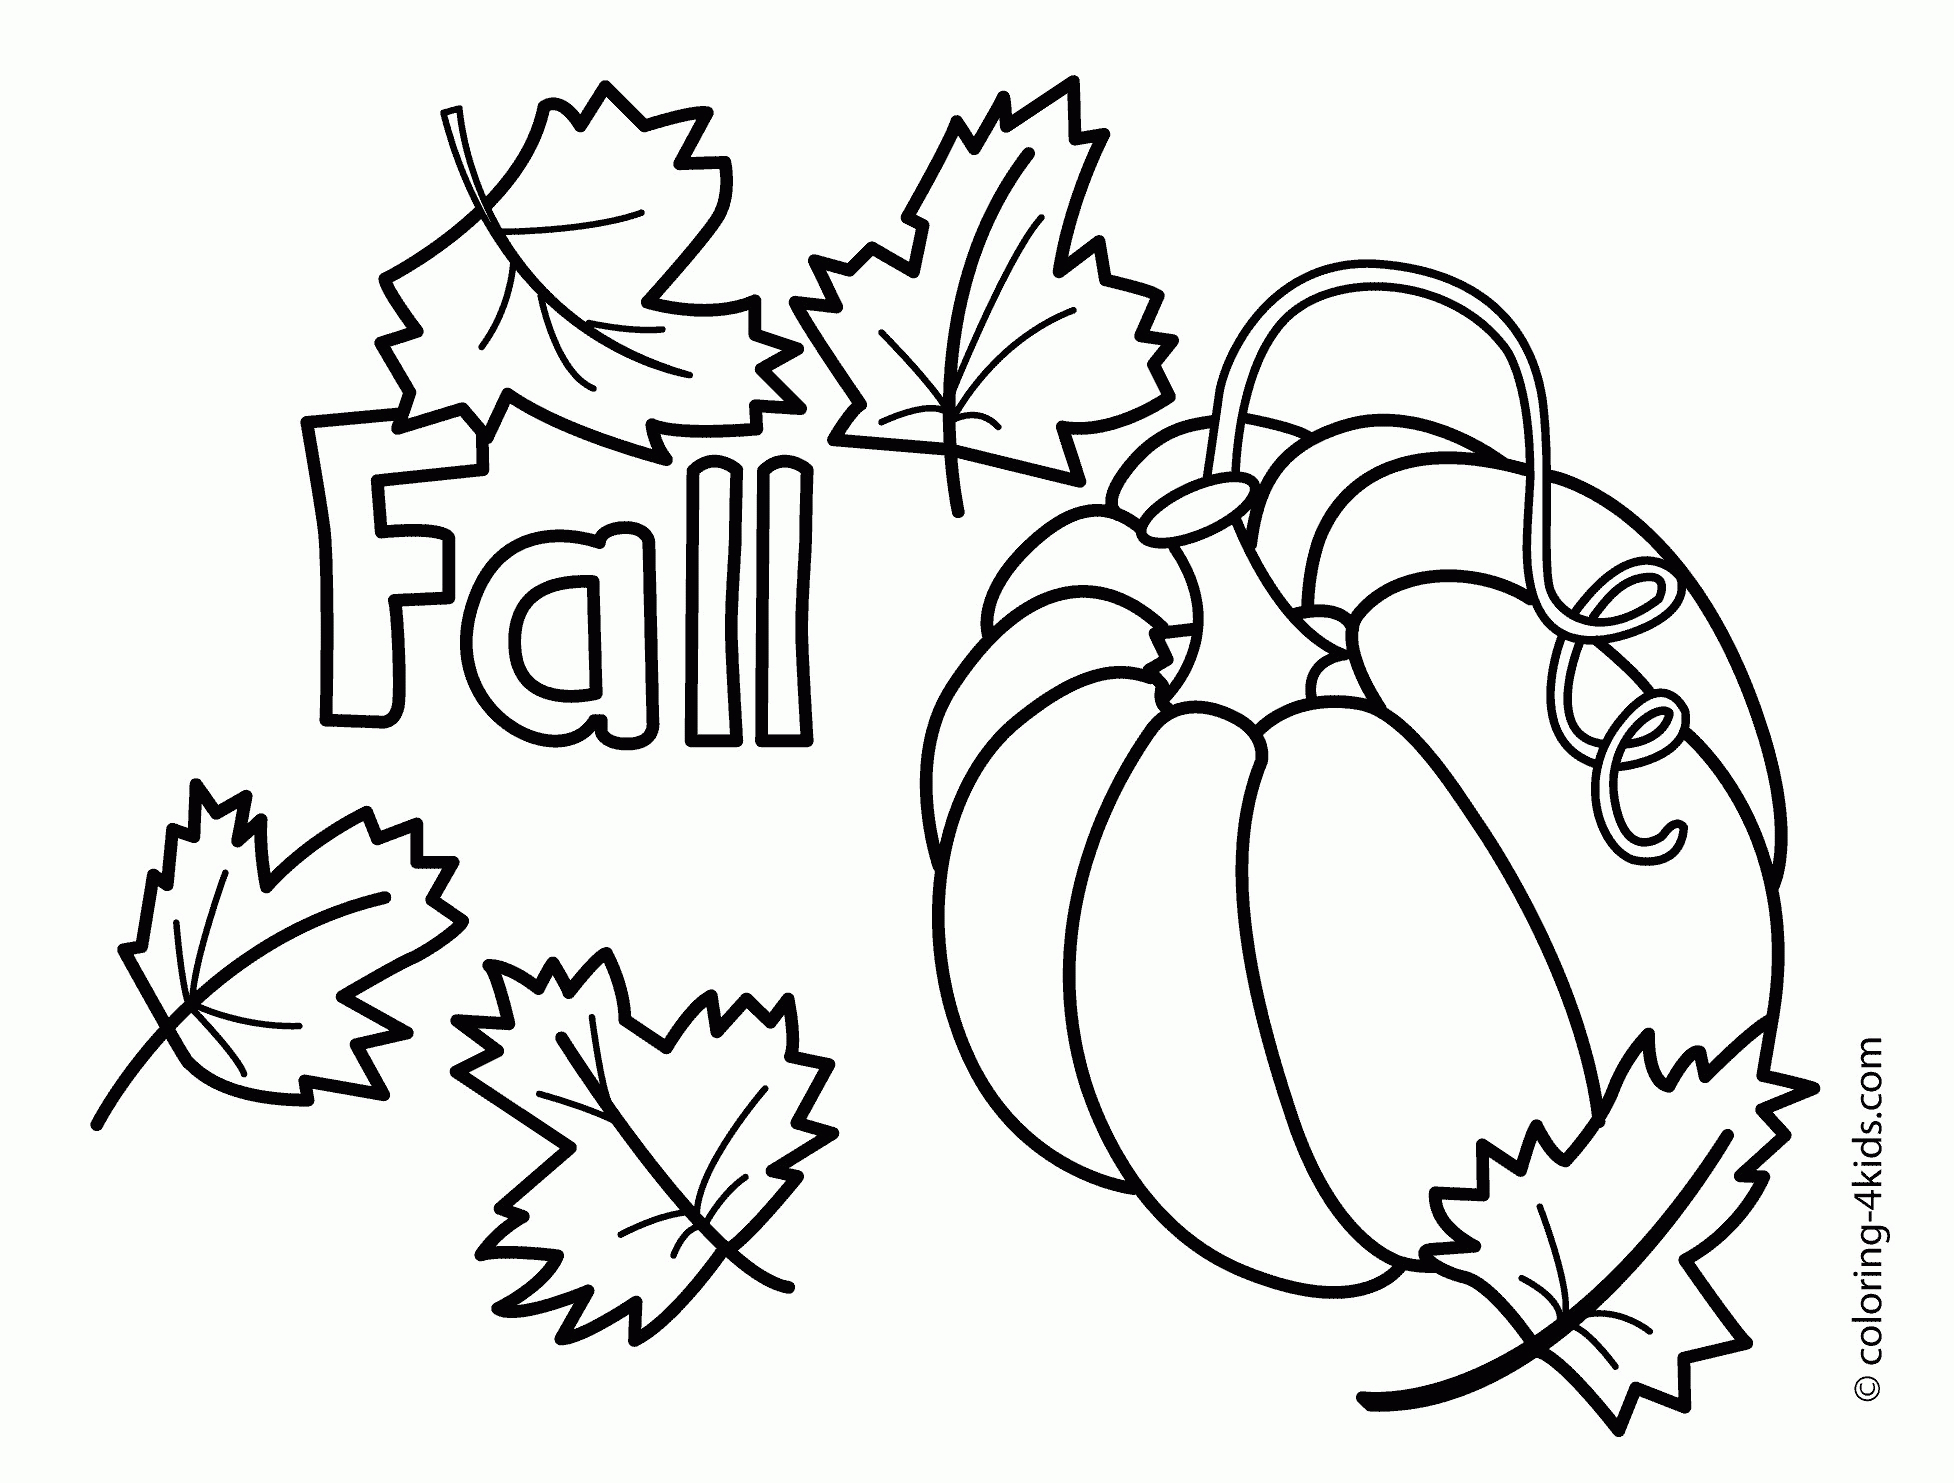 Coloring Pages : Stunning Fall Coloringes Printable Photo Ideas Part - Free Printable Fall Coloring Pages For Adults